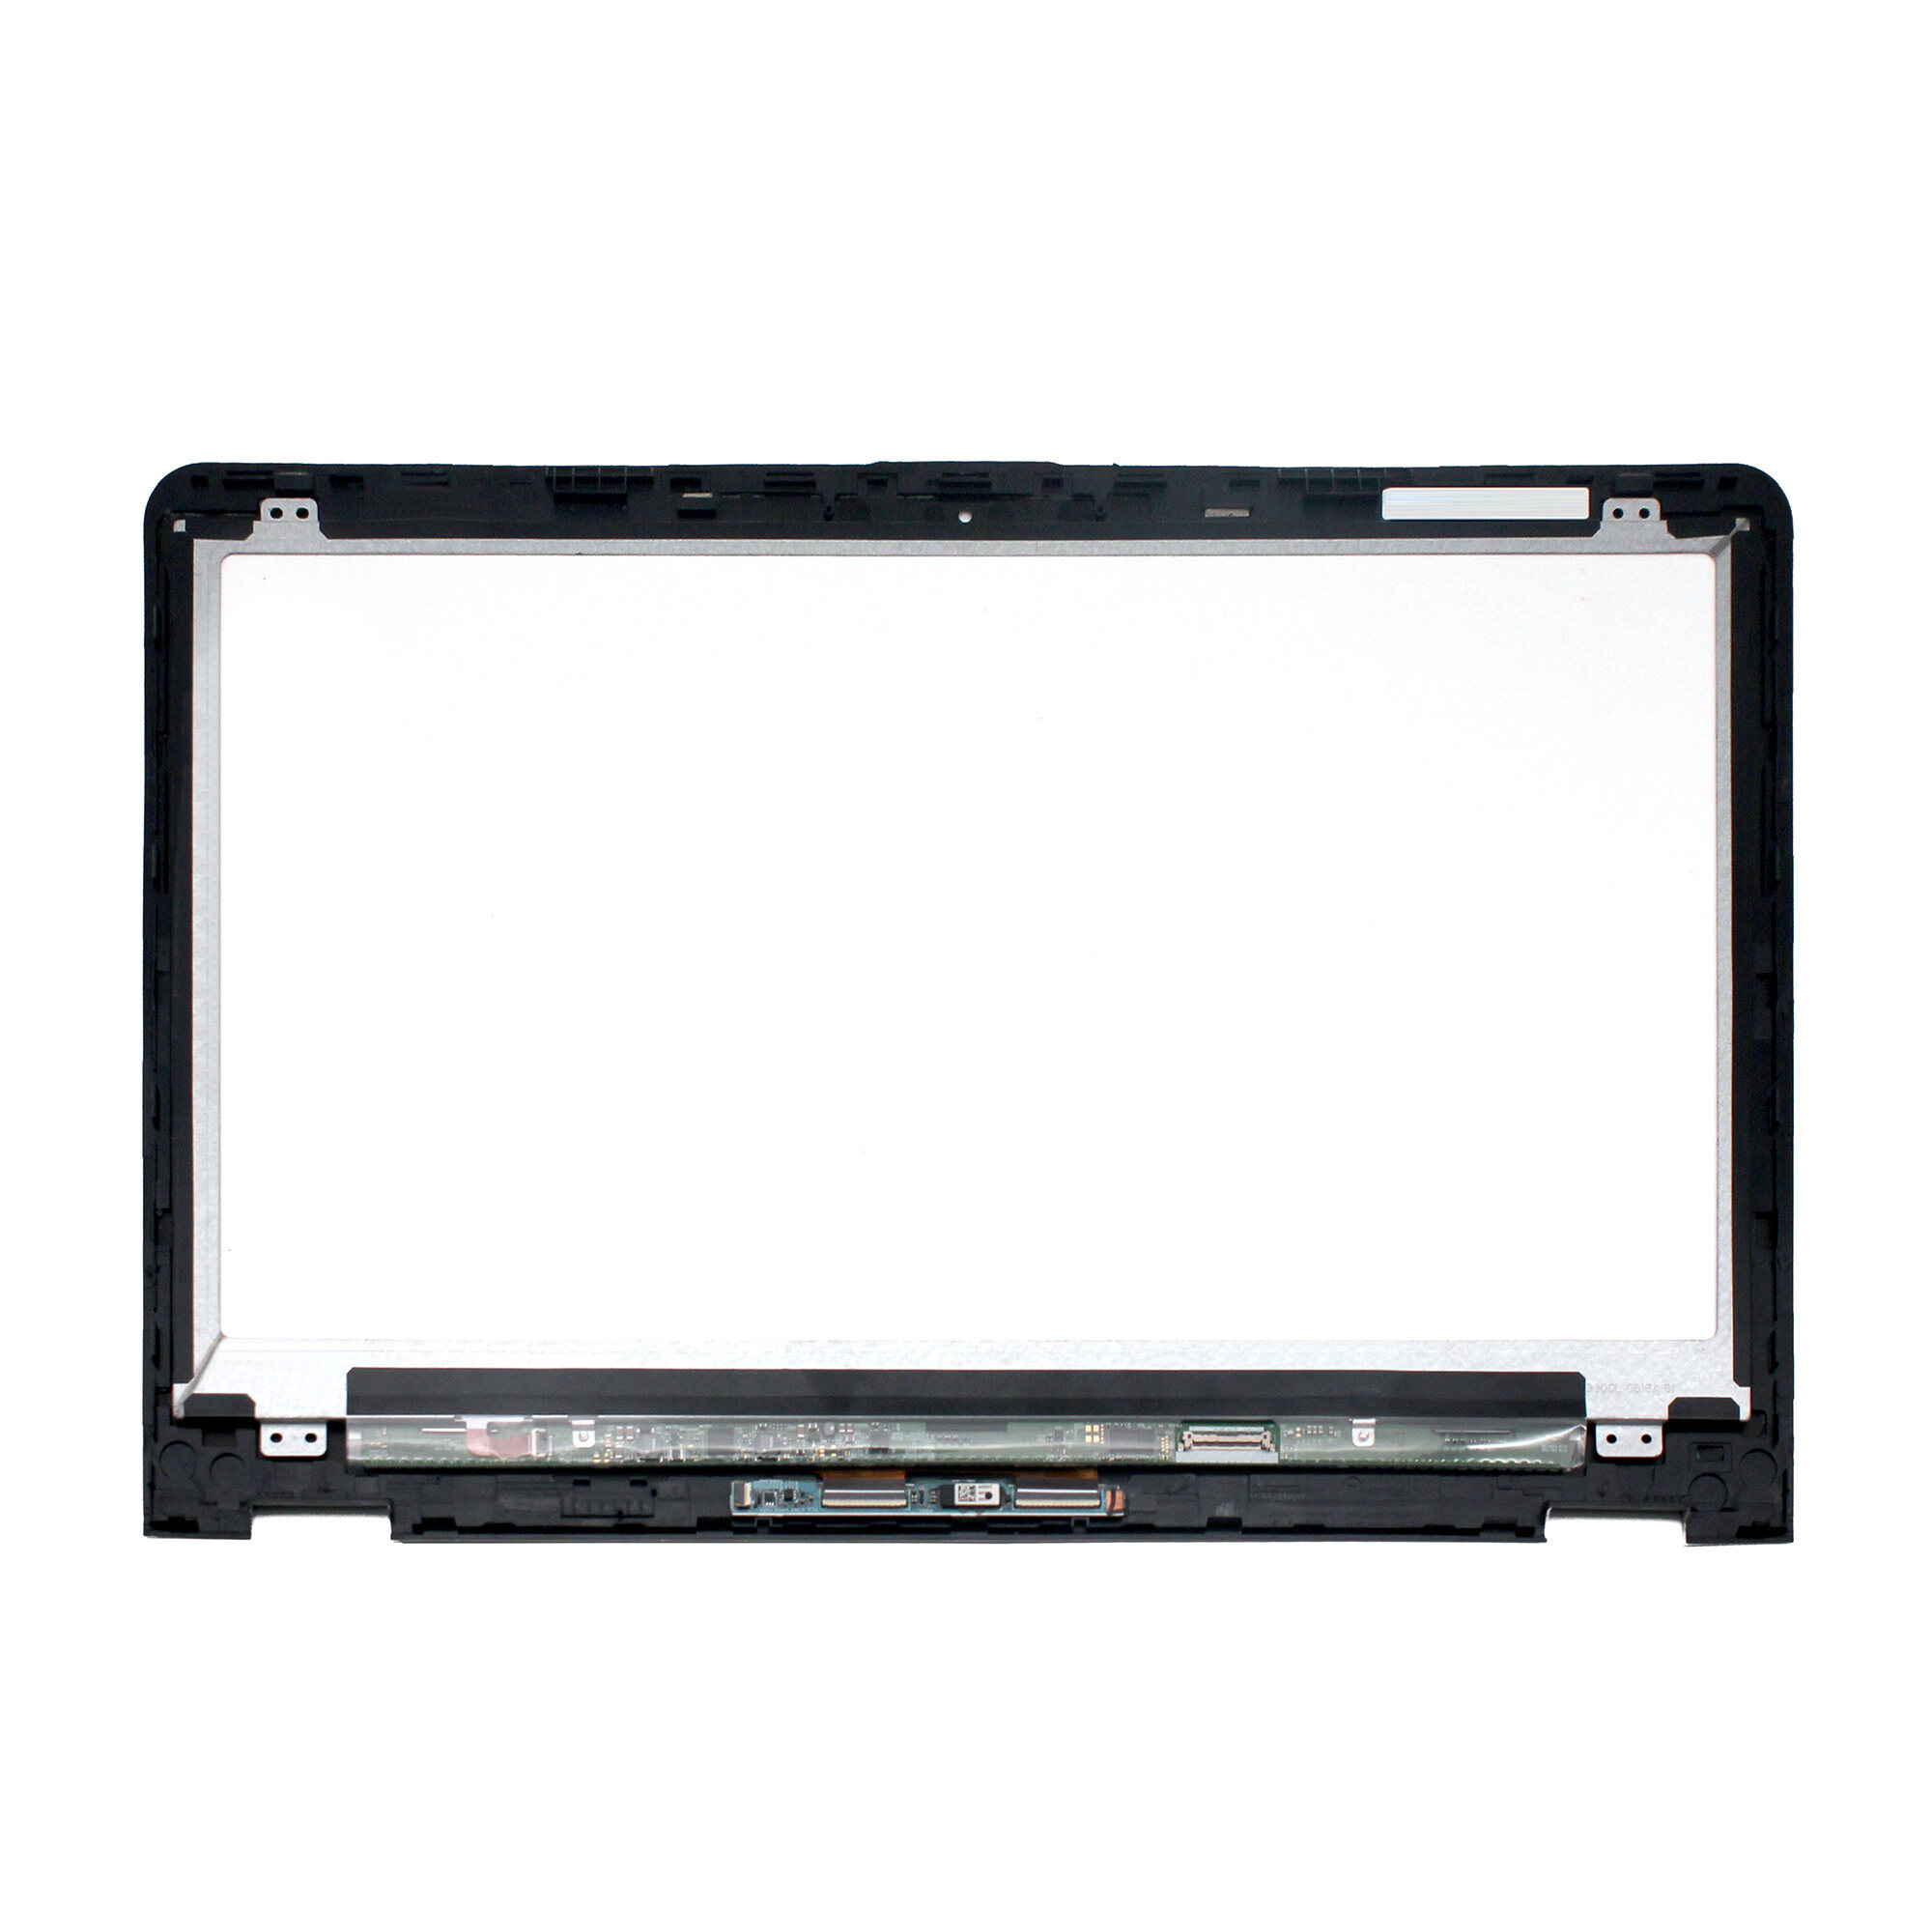 Kreplacement LCD Touch Screen Assembly For HP Envy x360 15-AQ018CA 15-AQ110NR 15-AQ155NR 15-AQ156NR 15-aq001nx 15-AQ273CL 15-aq160sa